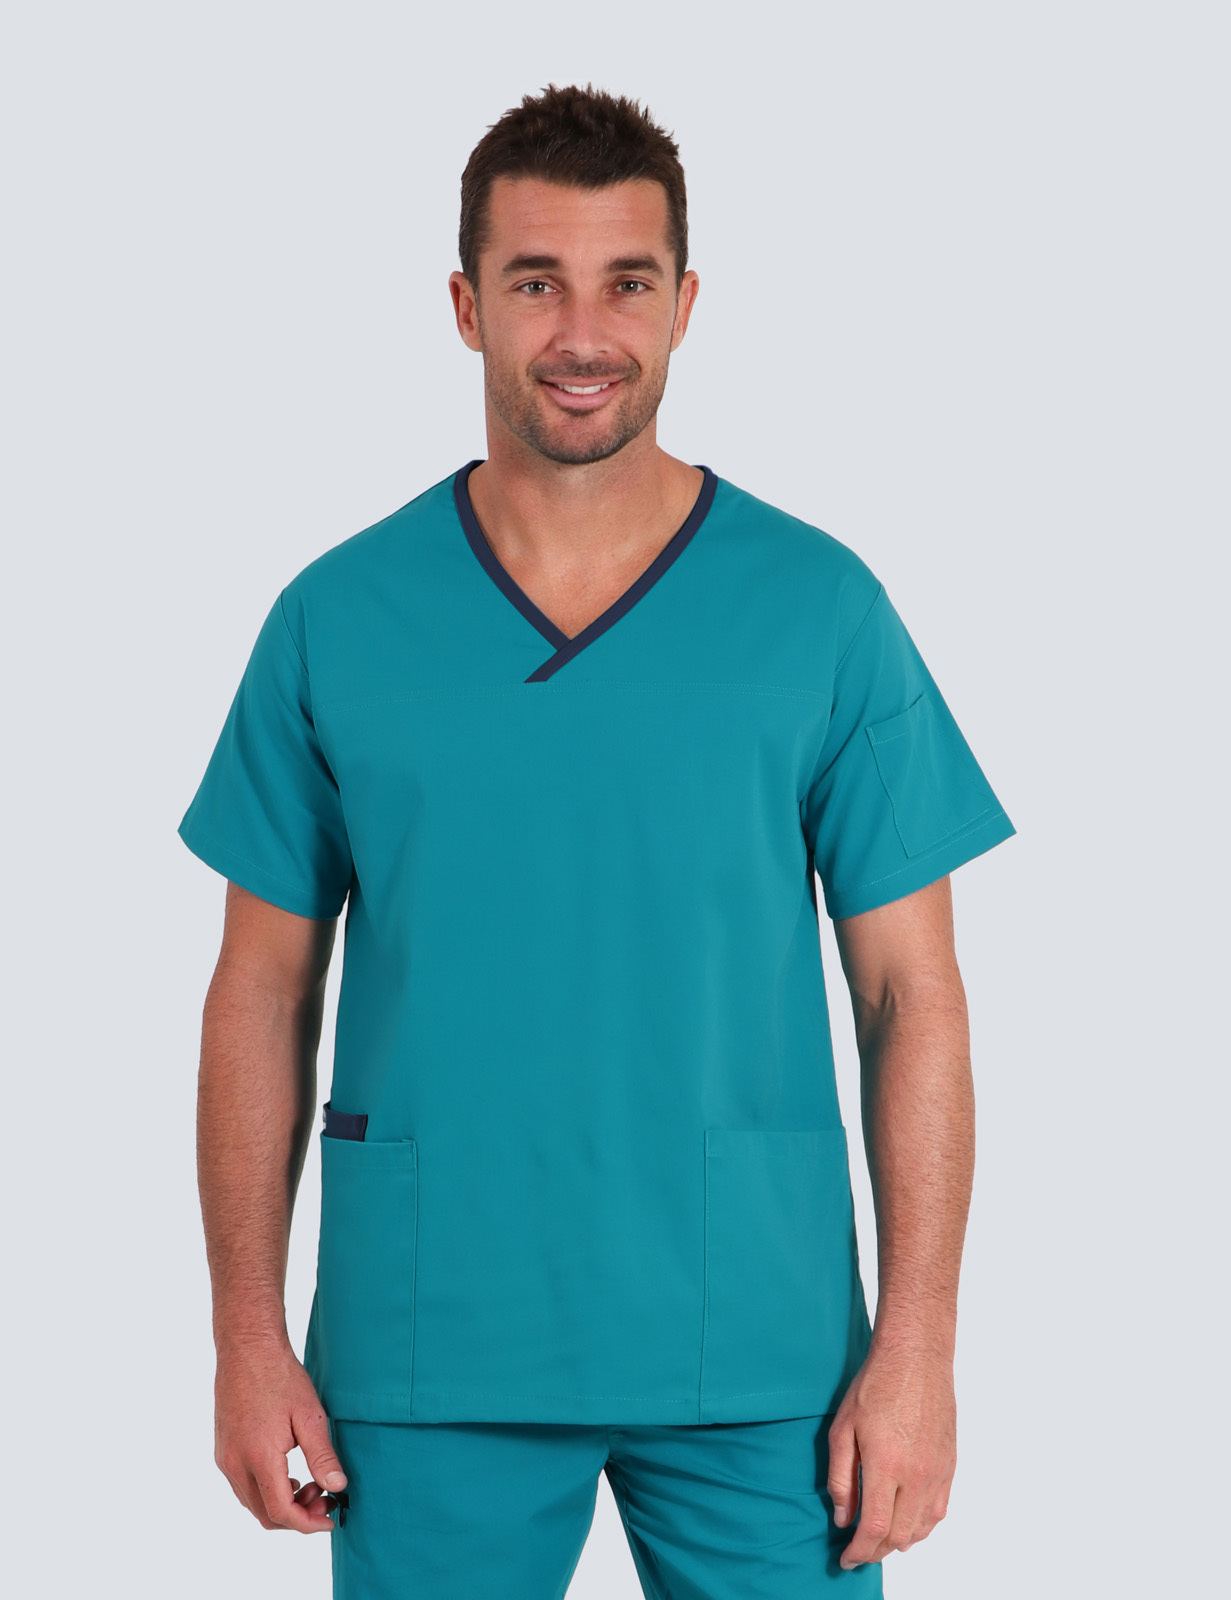 Men's Fit Scrub Top with Contrast Trim